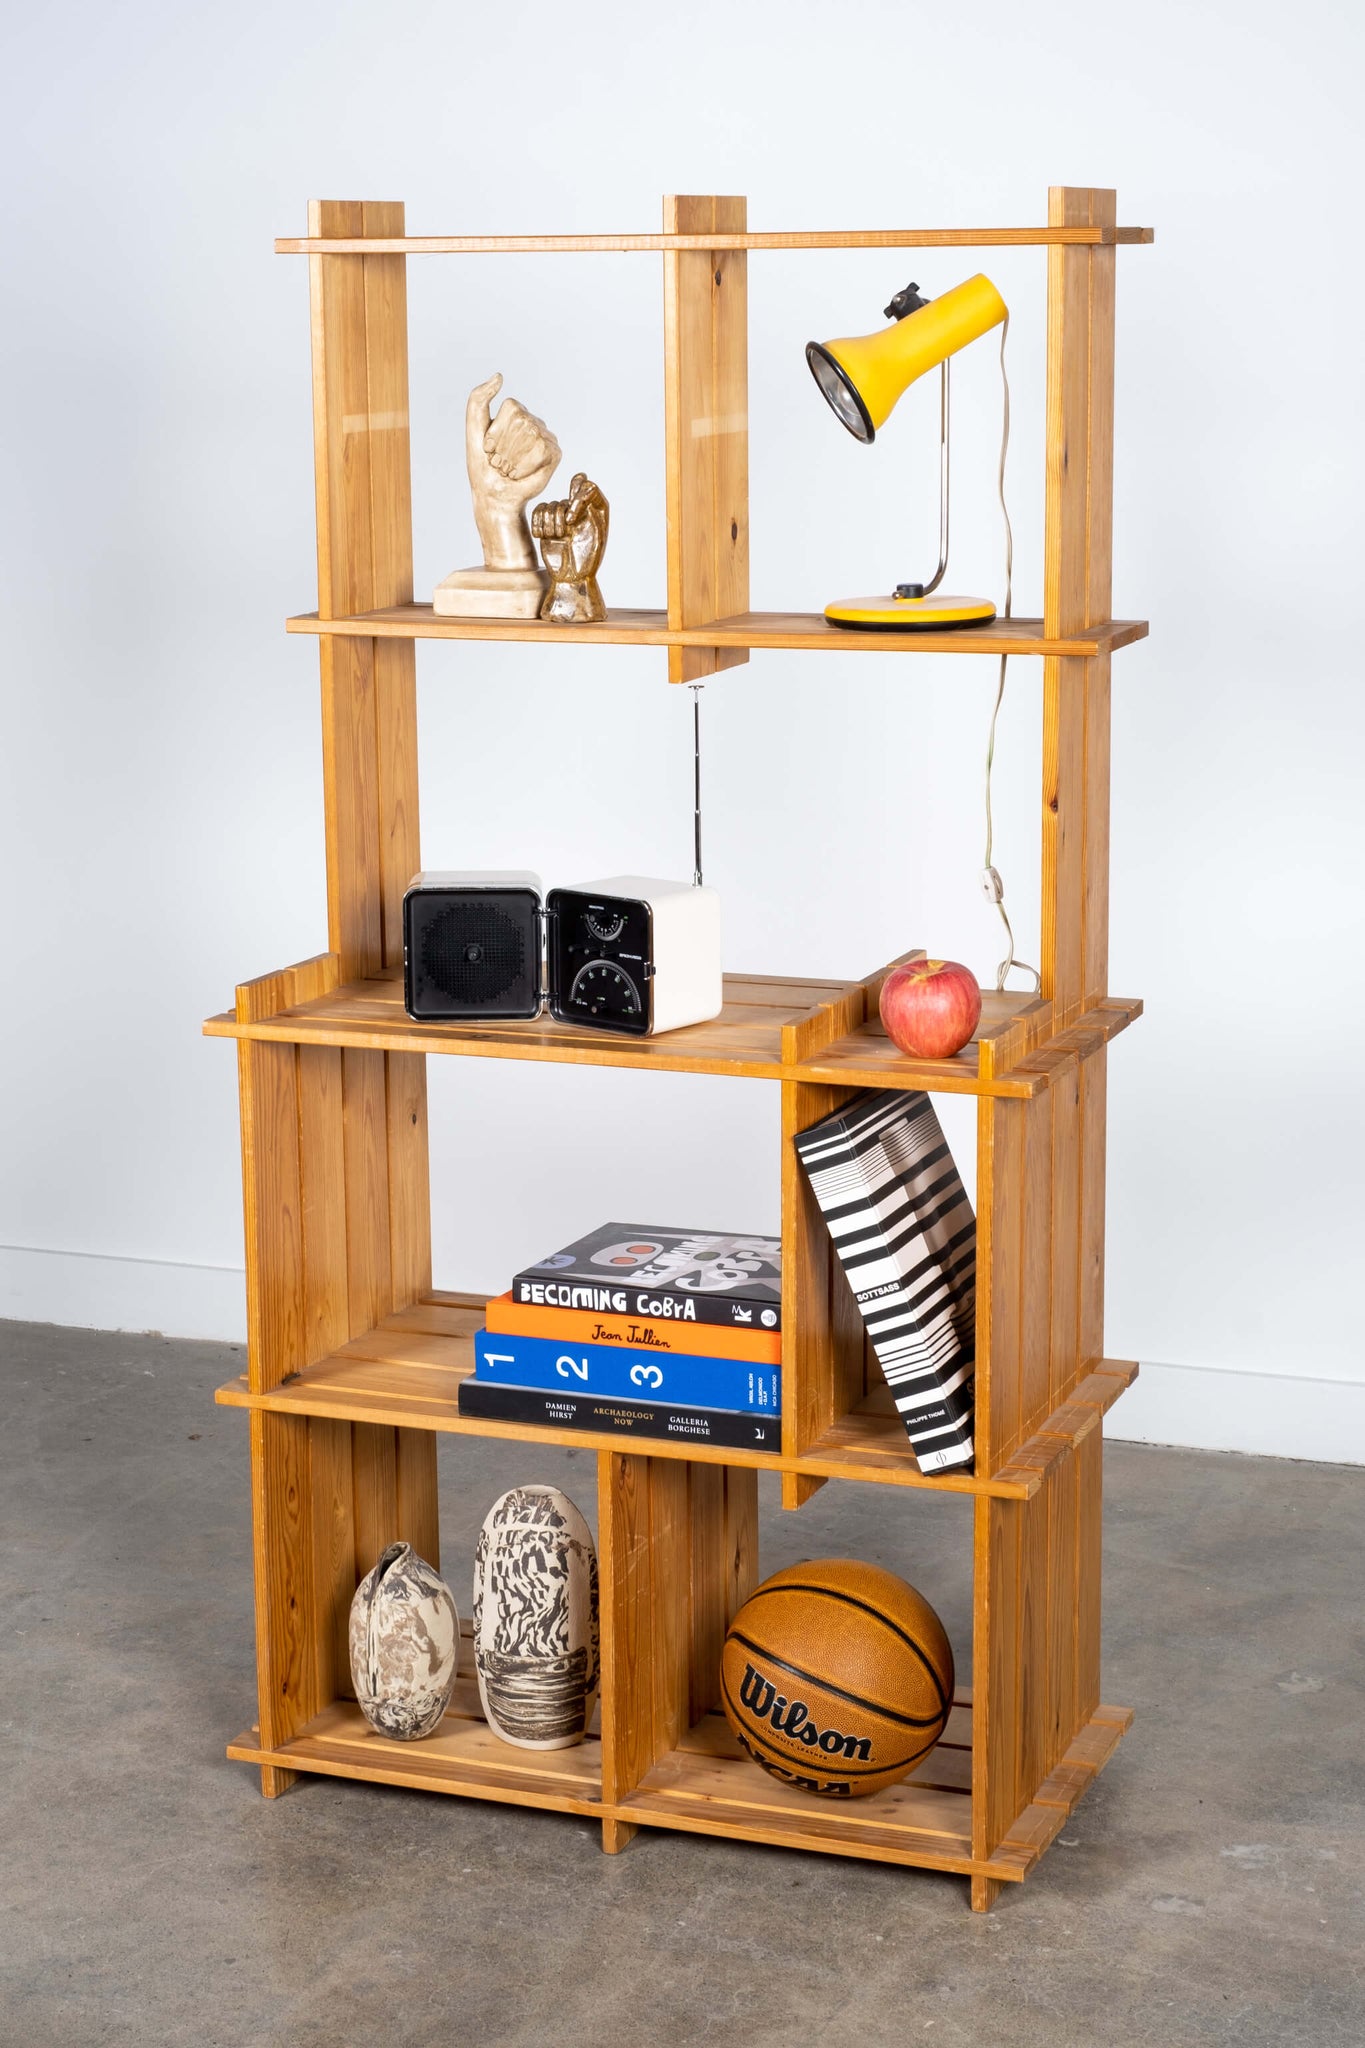 1970s Vintage Danish Modernist Pine Shelving Unit, shown with books, lamp and decorative objects